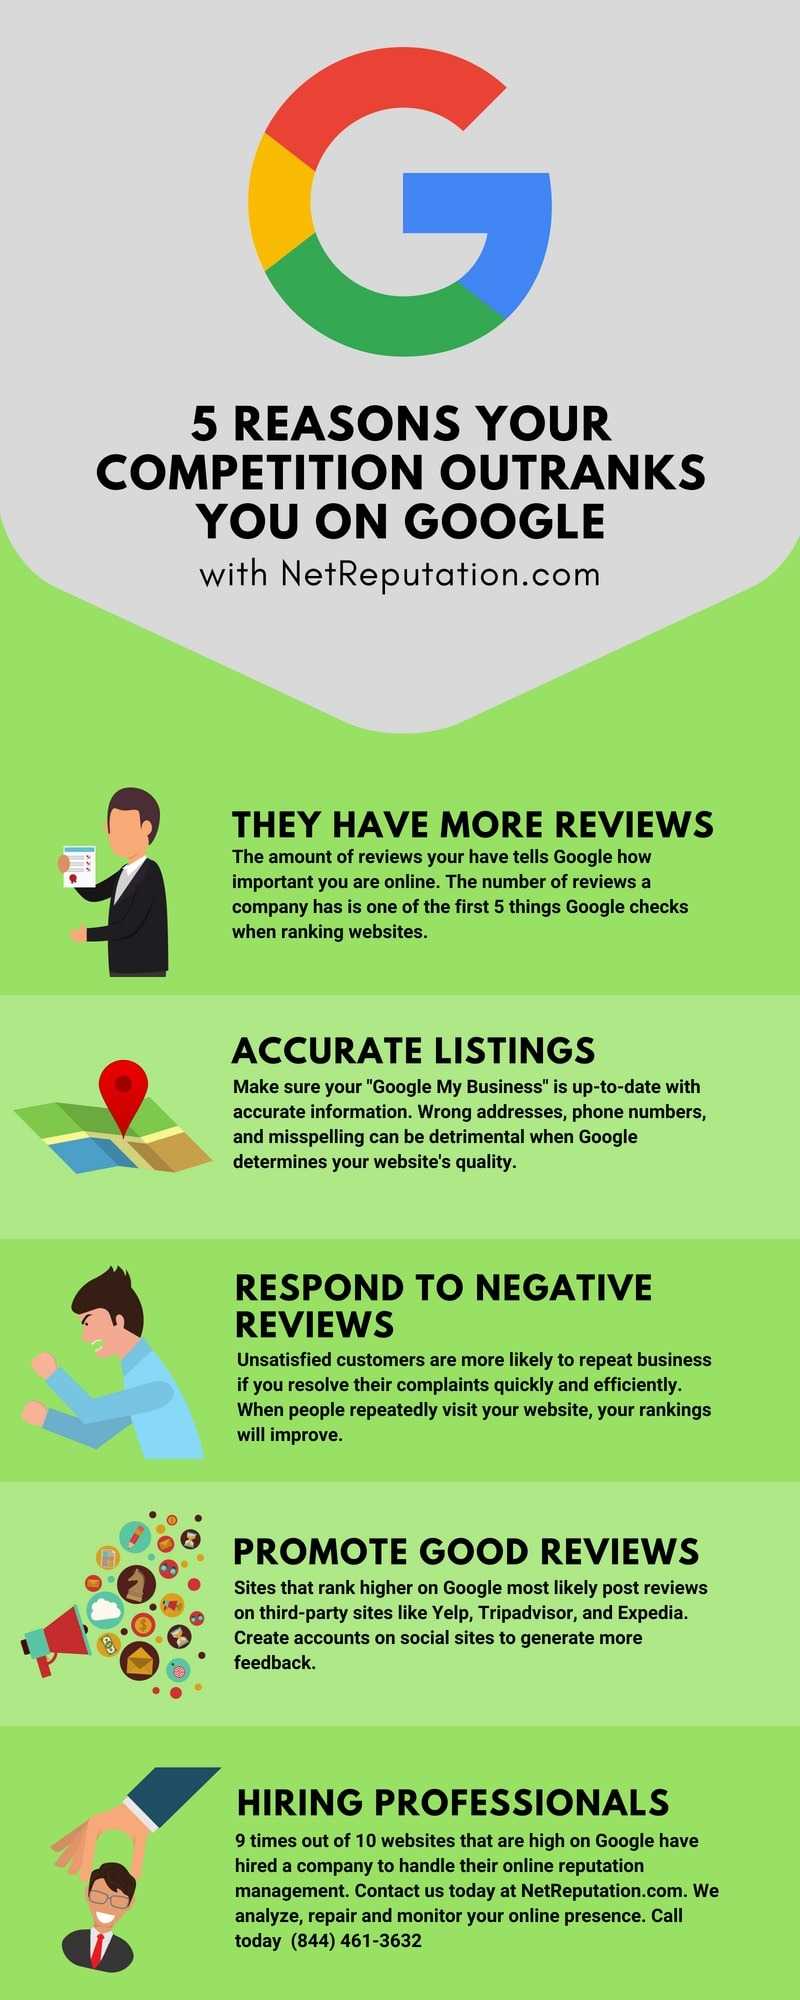 Top 5 Reasons Your Competition Ranks on Google